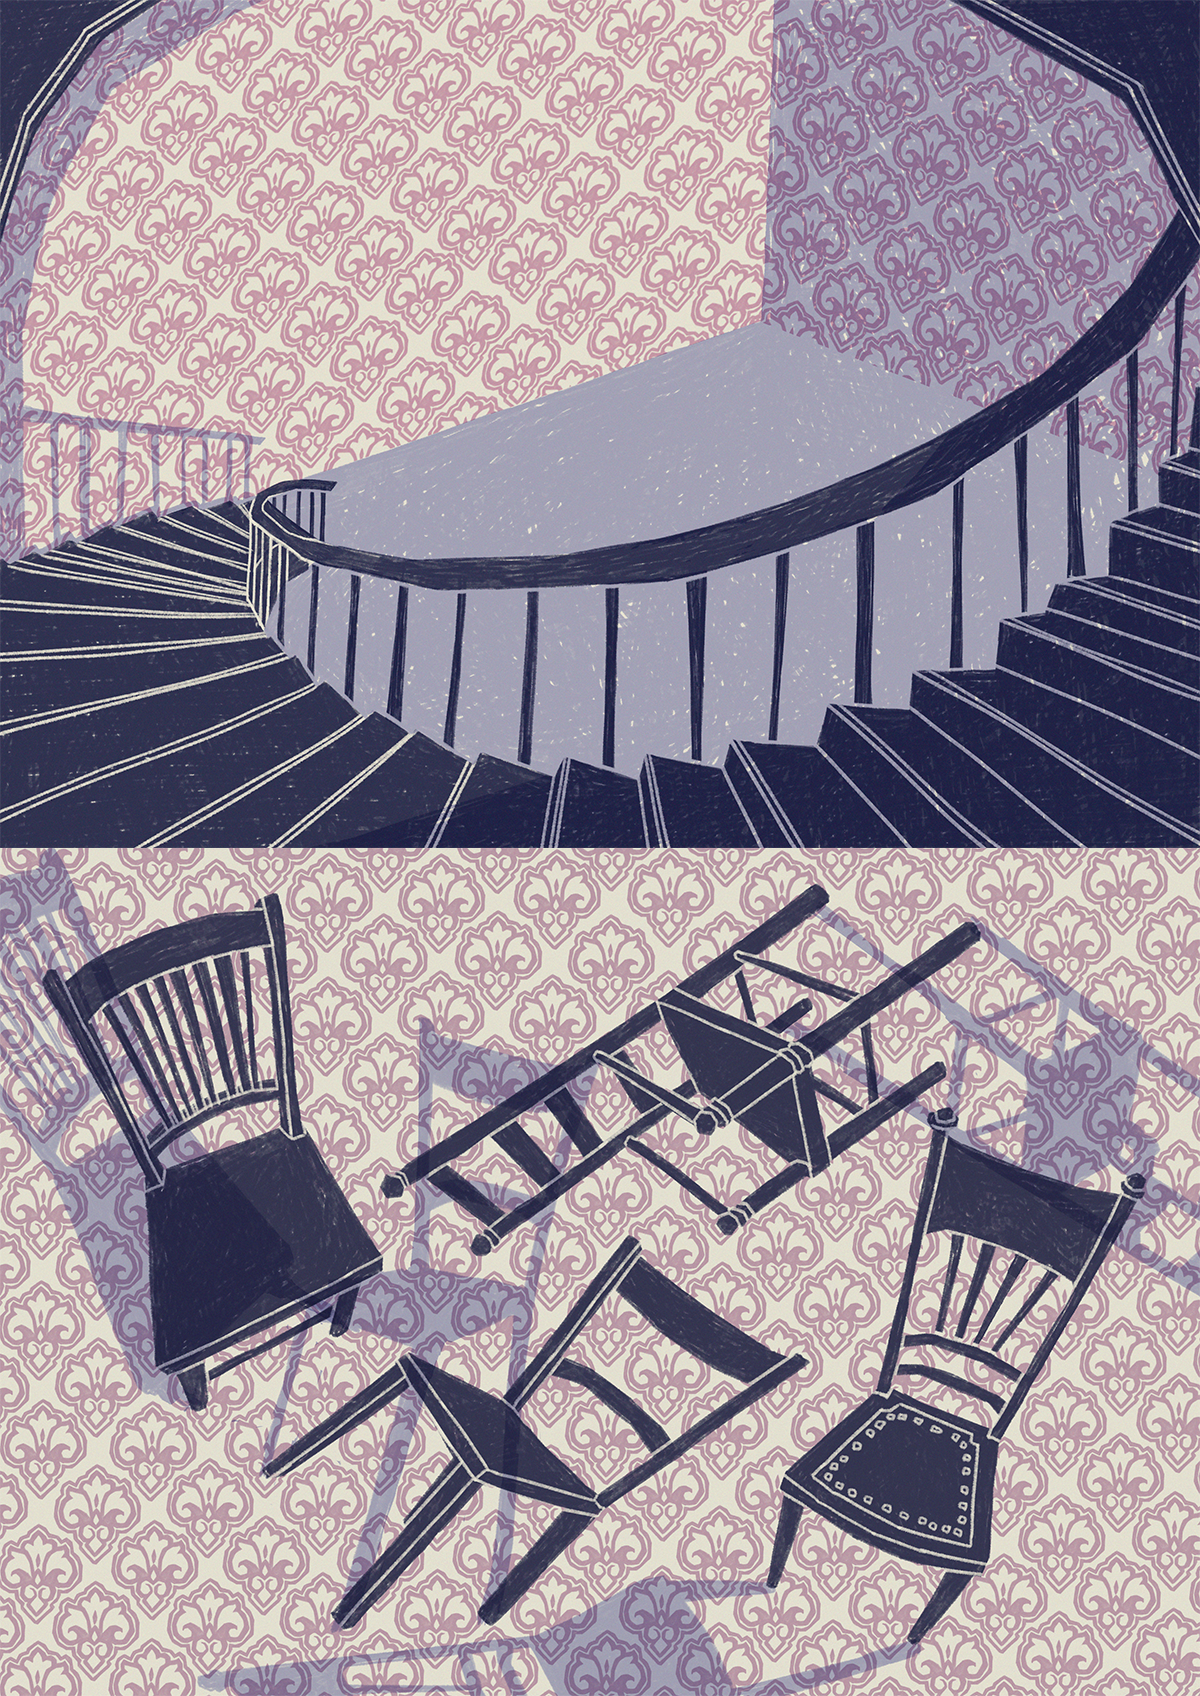 Illustrations inspired by the poem ‘The Doll House’ by A.E. Stalling